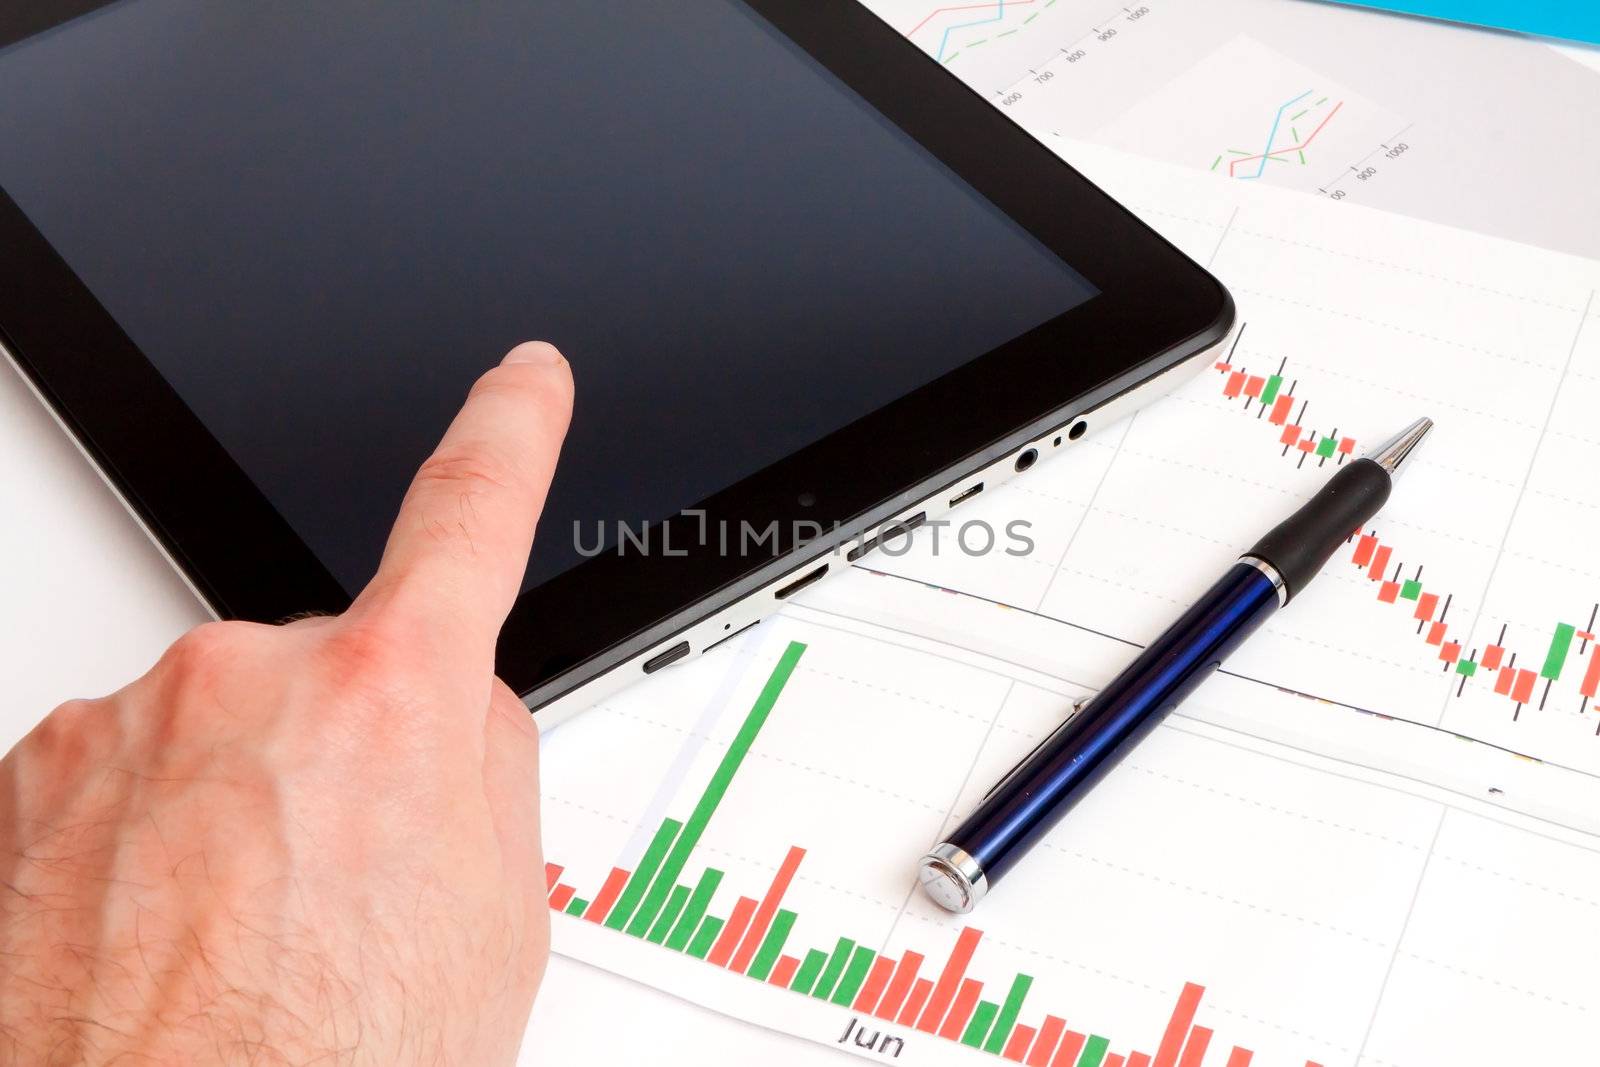 Desktop in stock exchange office with a tablet pc showing stock market chart. 